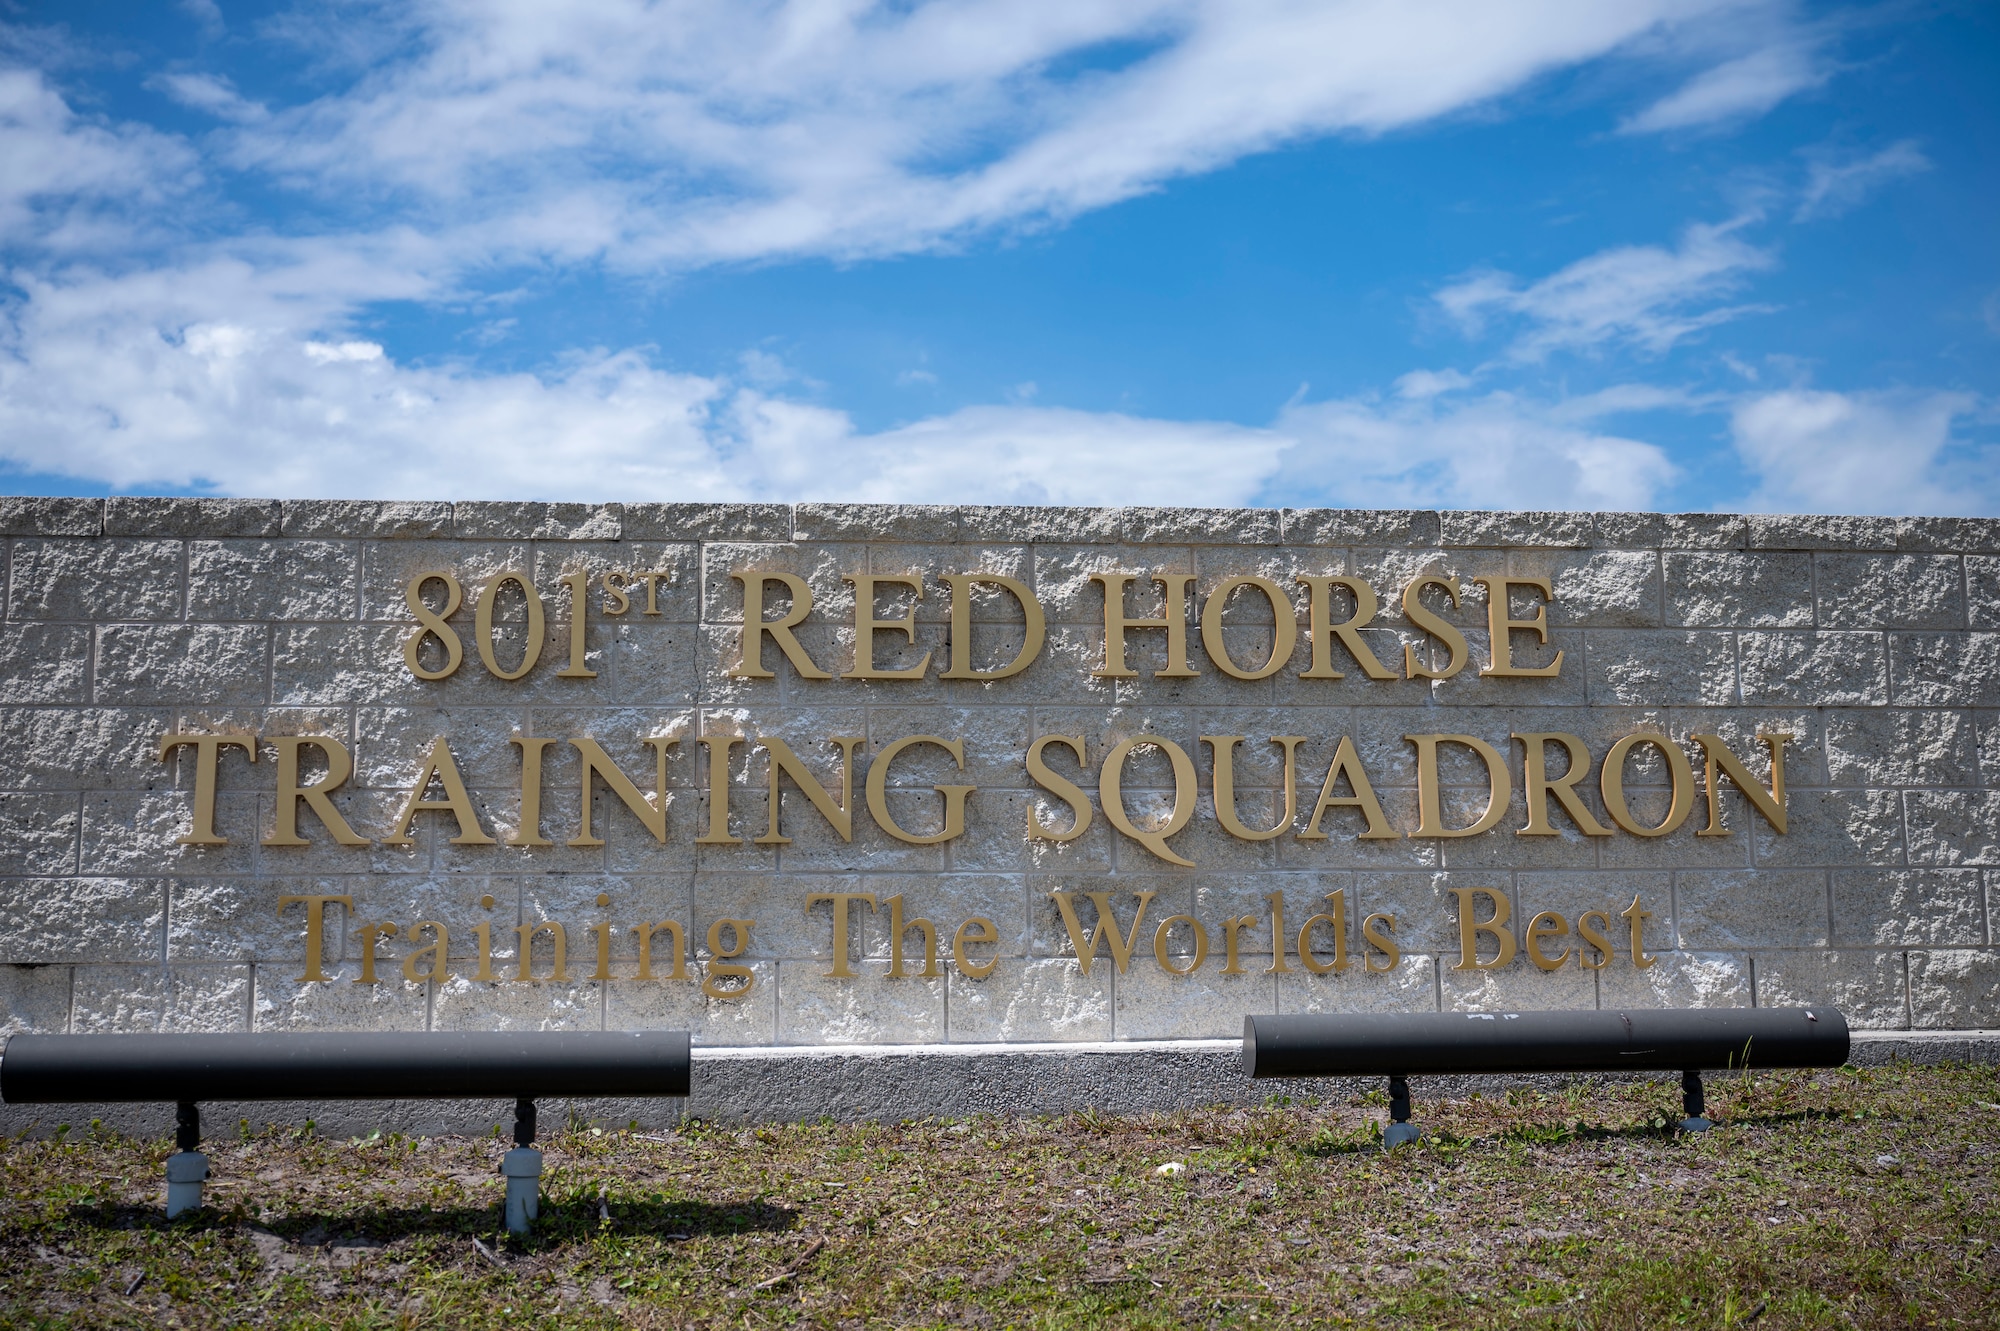 A sign identifying the 801st RED HORSE Training Squadron